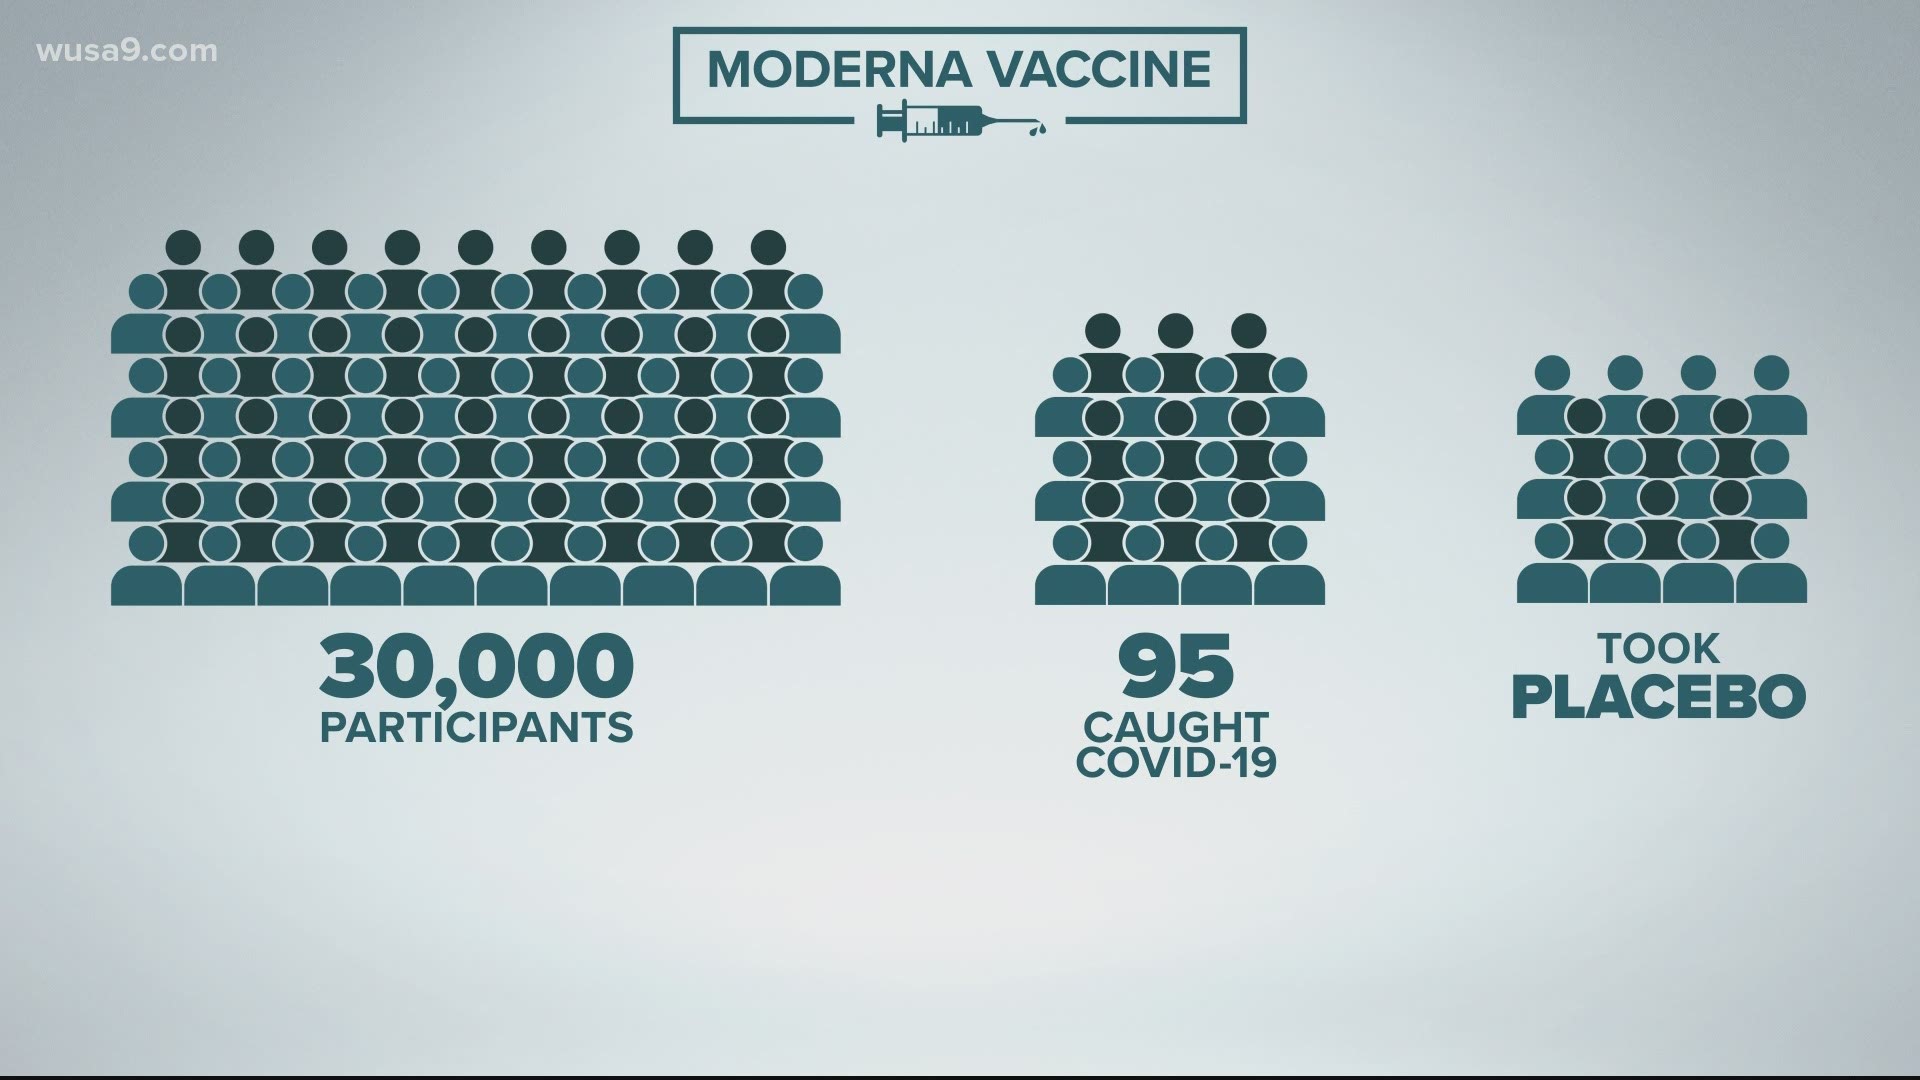 Moderna released the initial results of their Phase III clinical trial for a coronavirus vaccine. We breakdown what efficacy is.